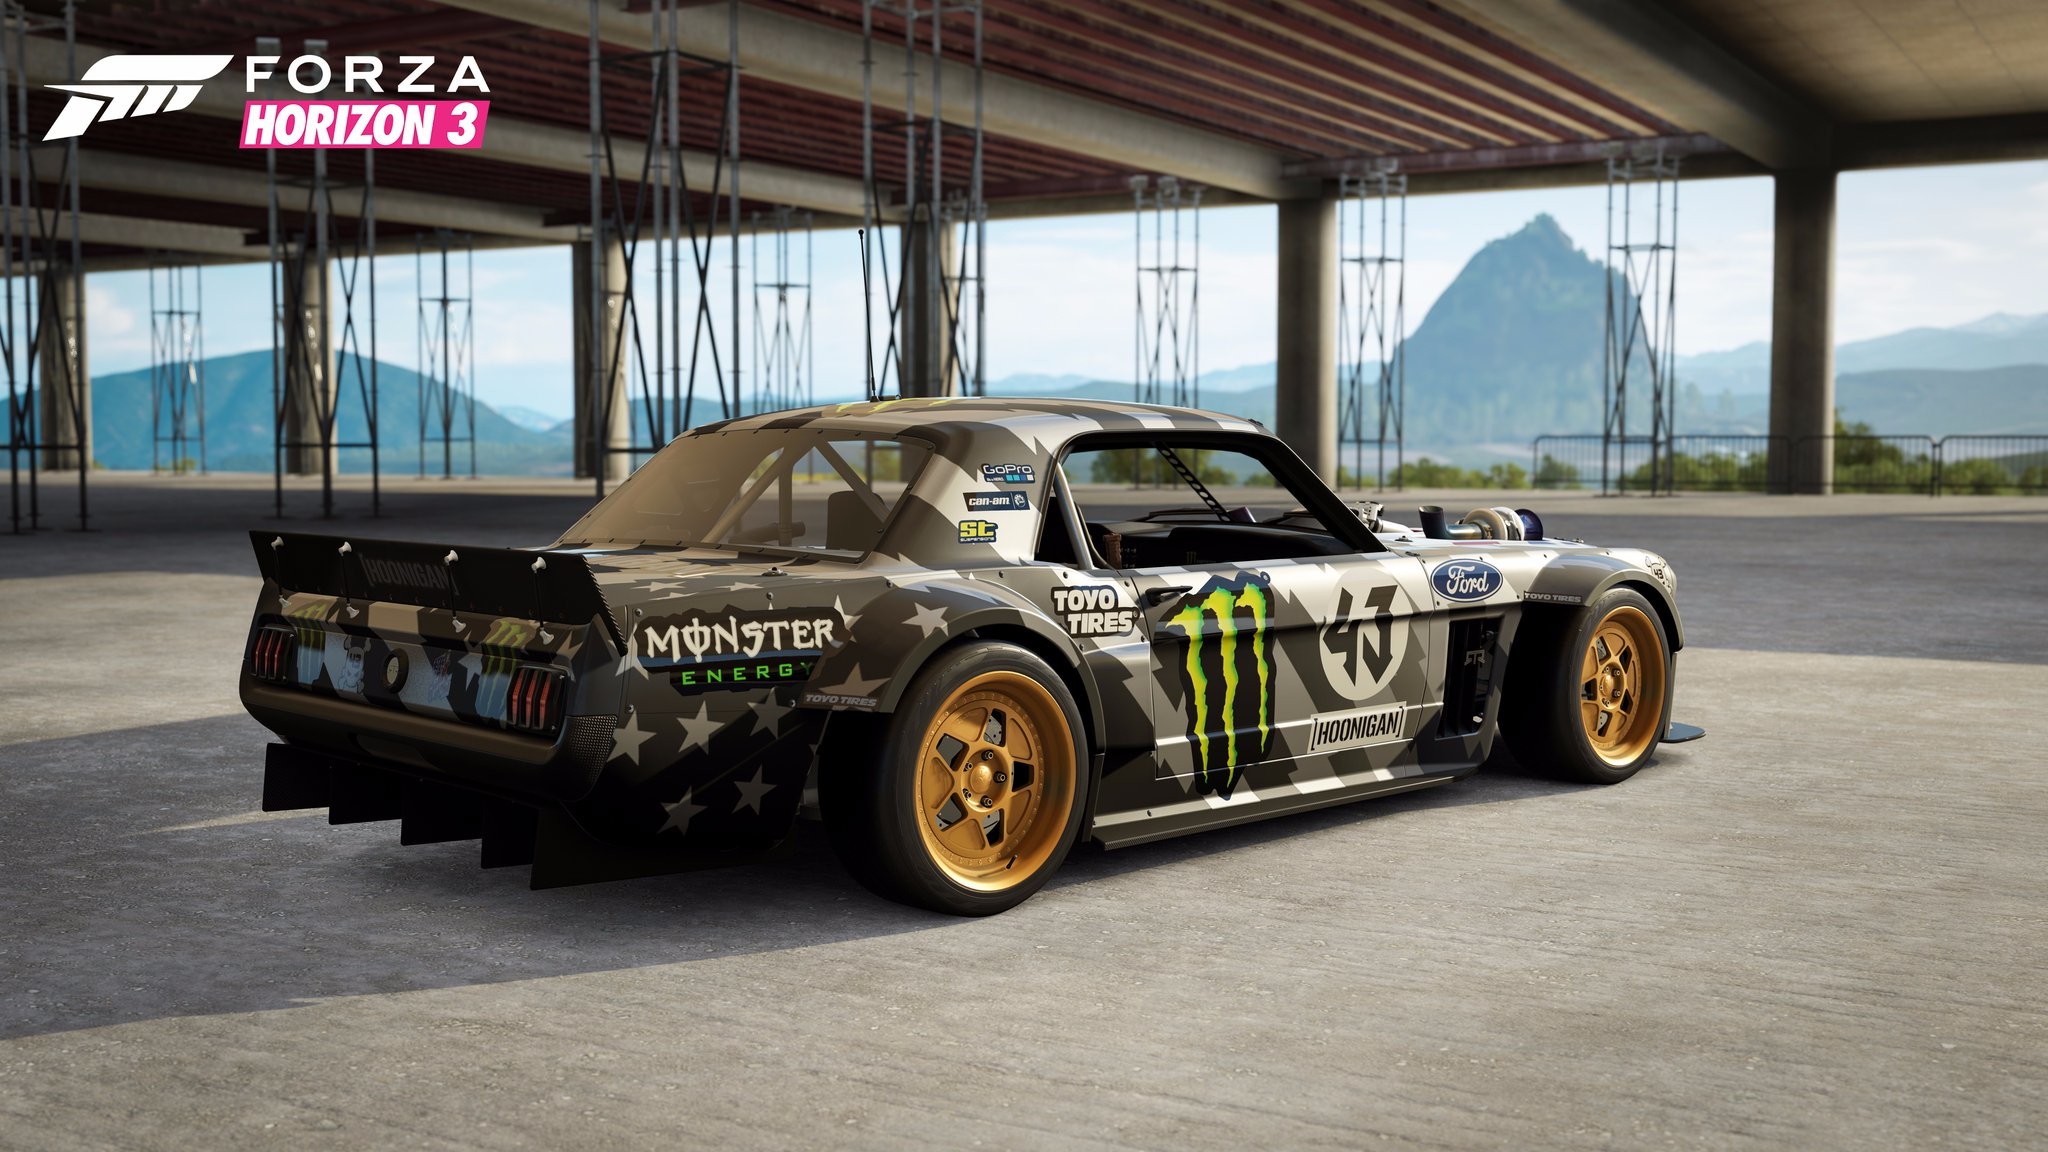 2048x1152 The Hoonigan Car Pack is available now for Forza Horizon 3, and includes  the 1965 Hoonigan Ford 'Hoonicorn' Mustang, 1979 Hoonigan Baldwin  Motorsports ' ...